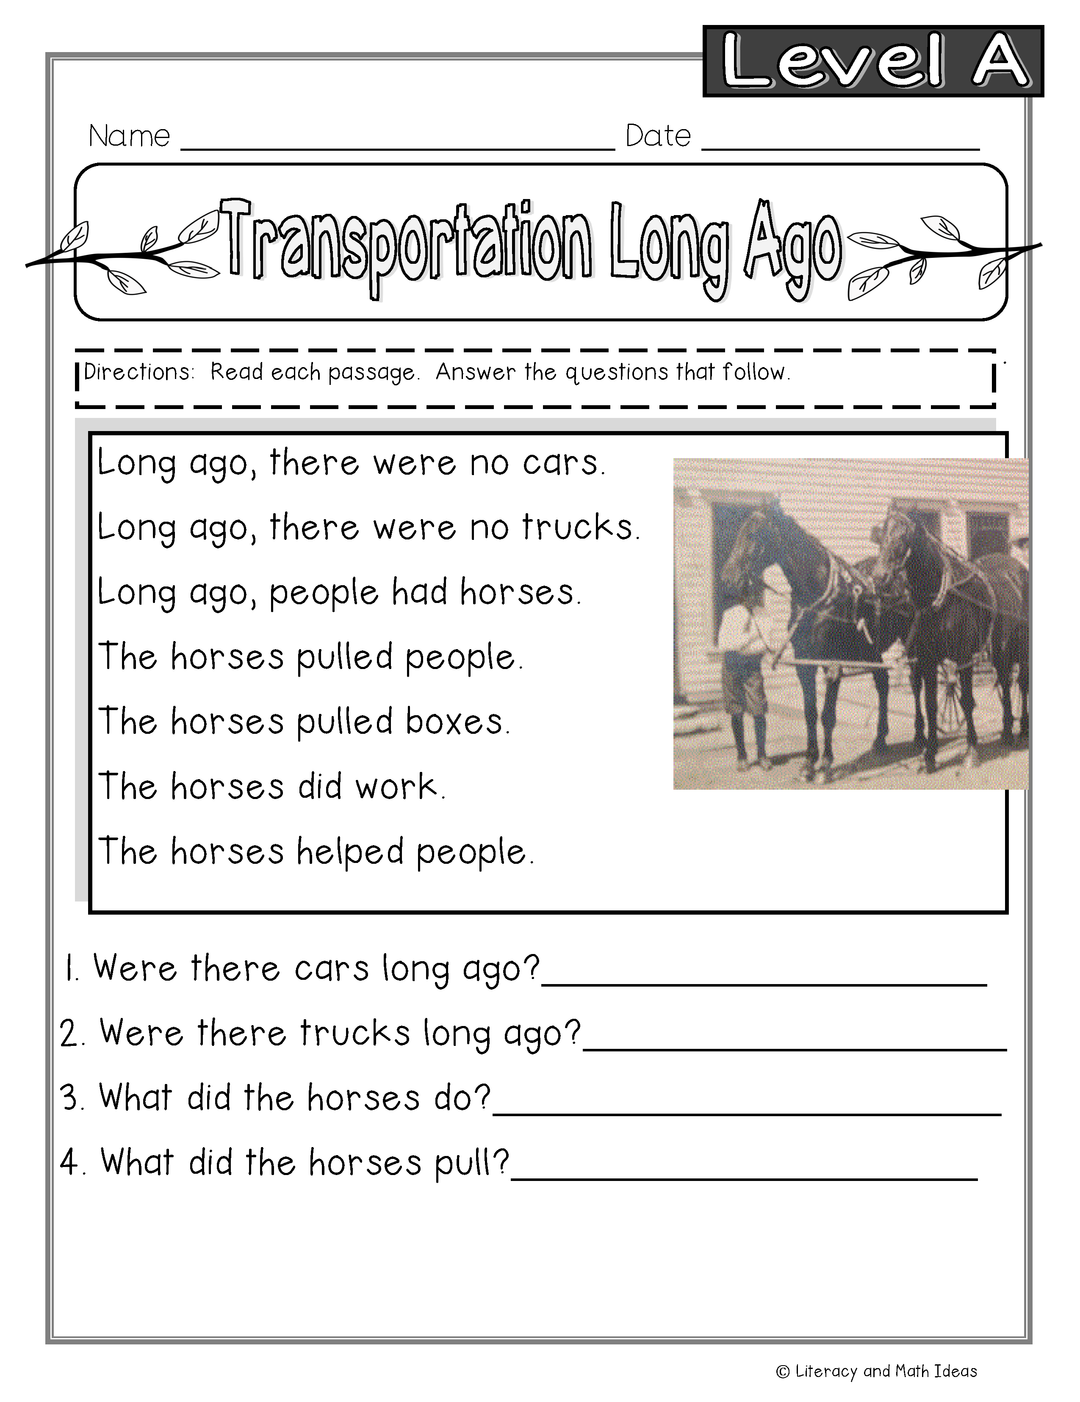 Guided Reading Nonfiction Passages Level A